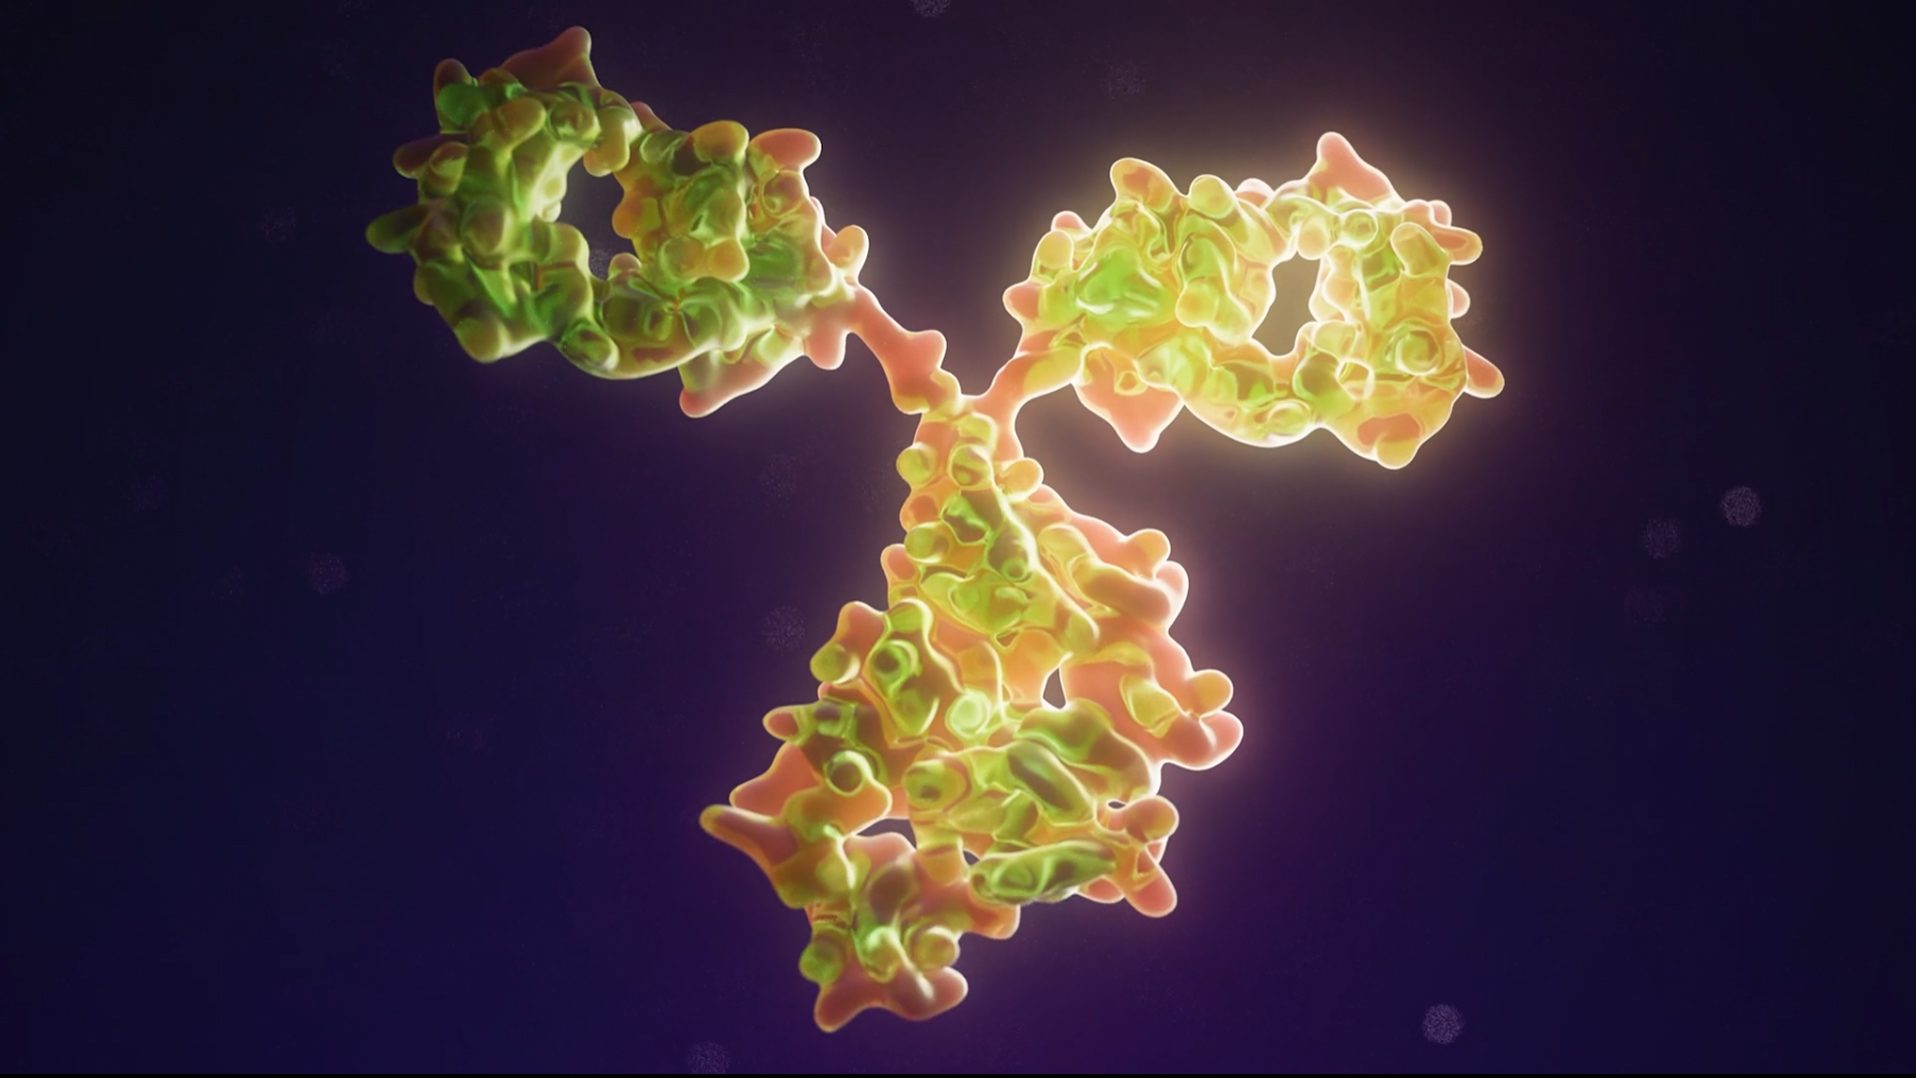 3D image of a green antibody on a purple background